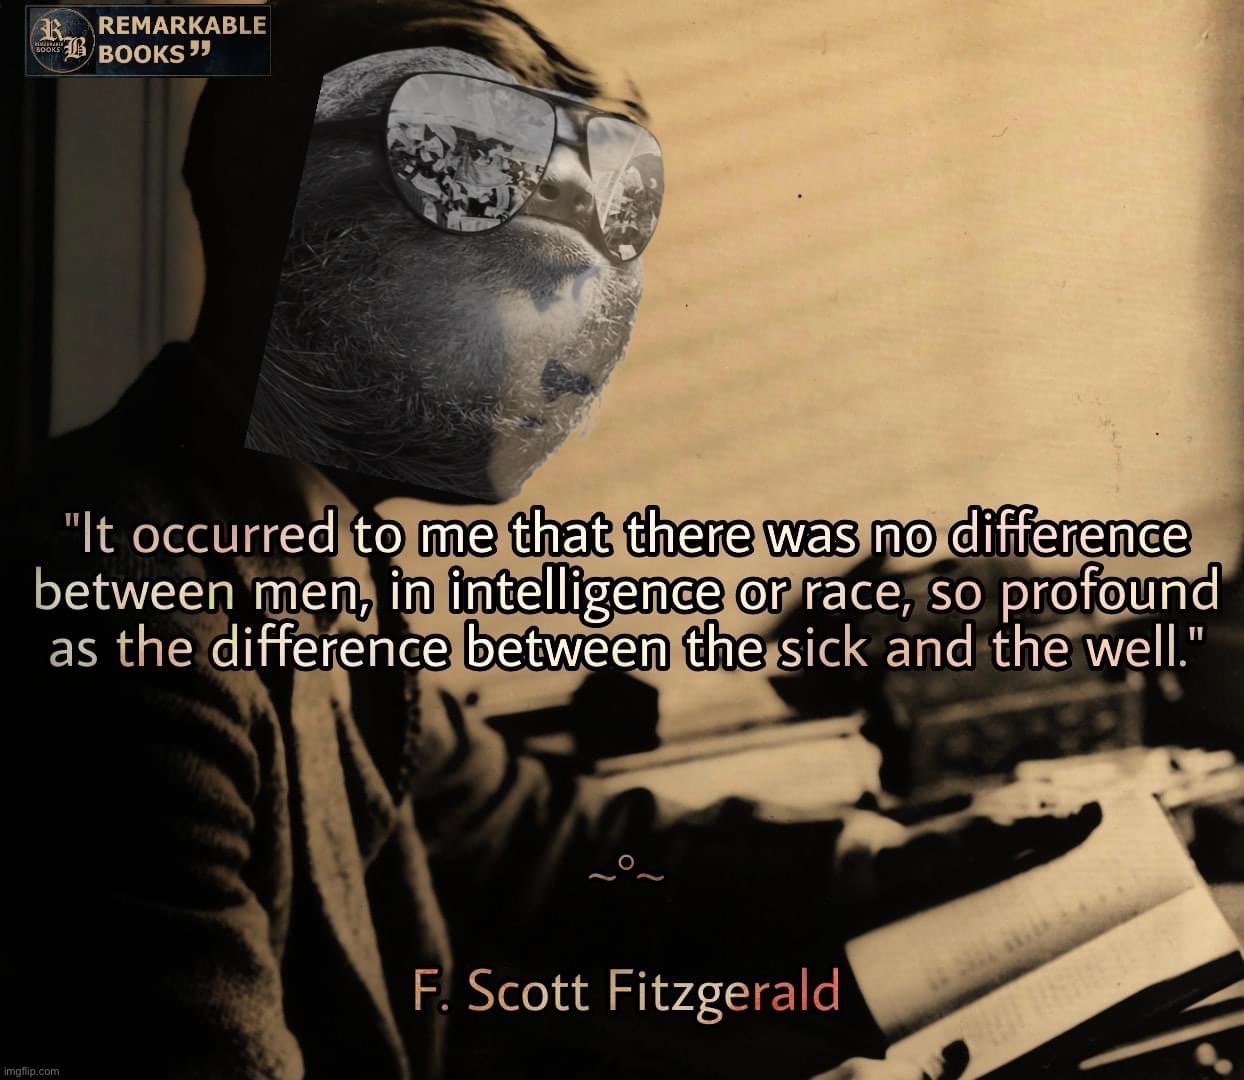 I said this | image tagged in f,scott,fitzgerald,facts,logic,i said this | made w/ Imgflip meme maker